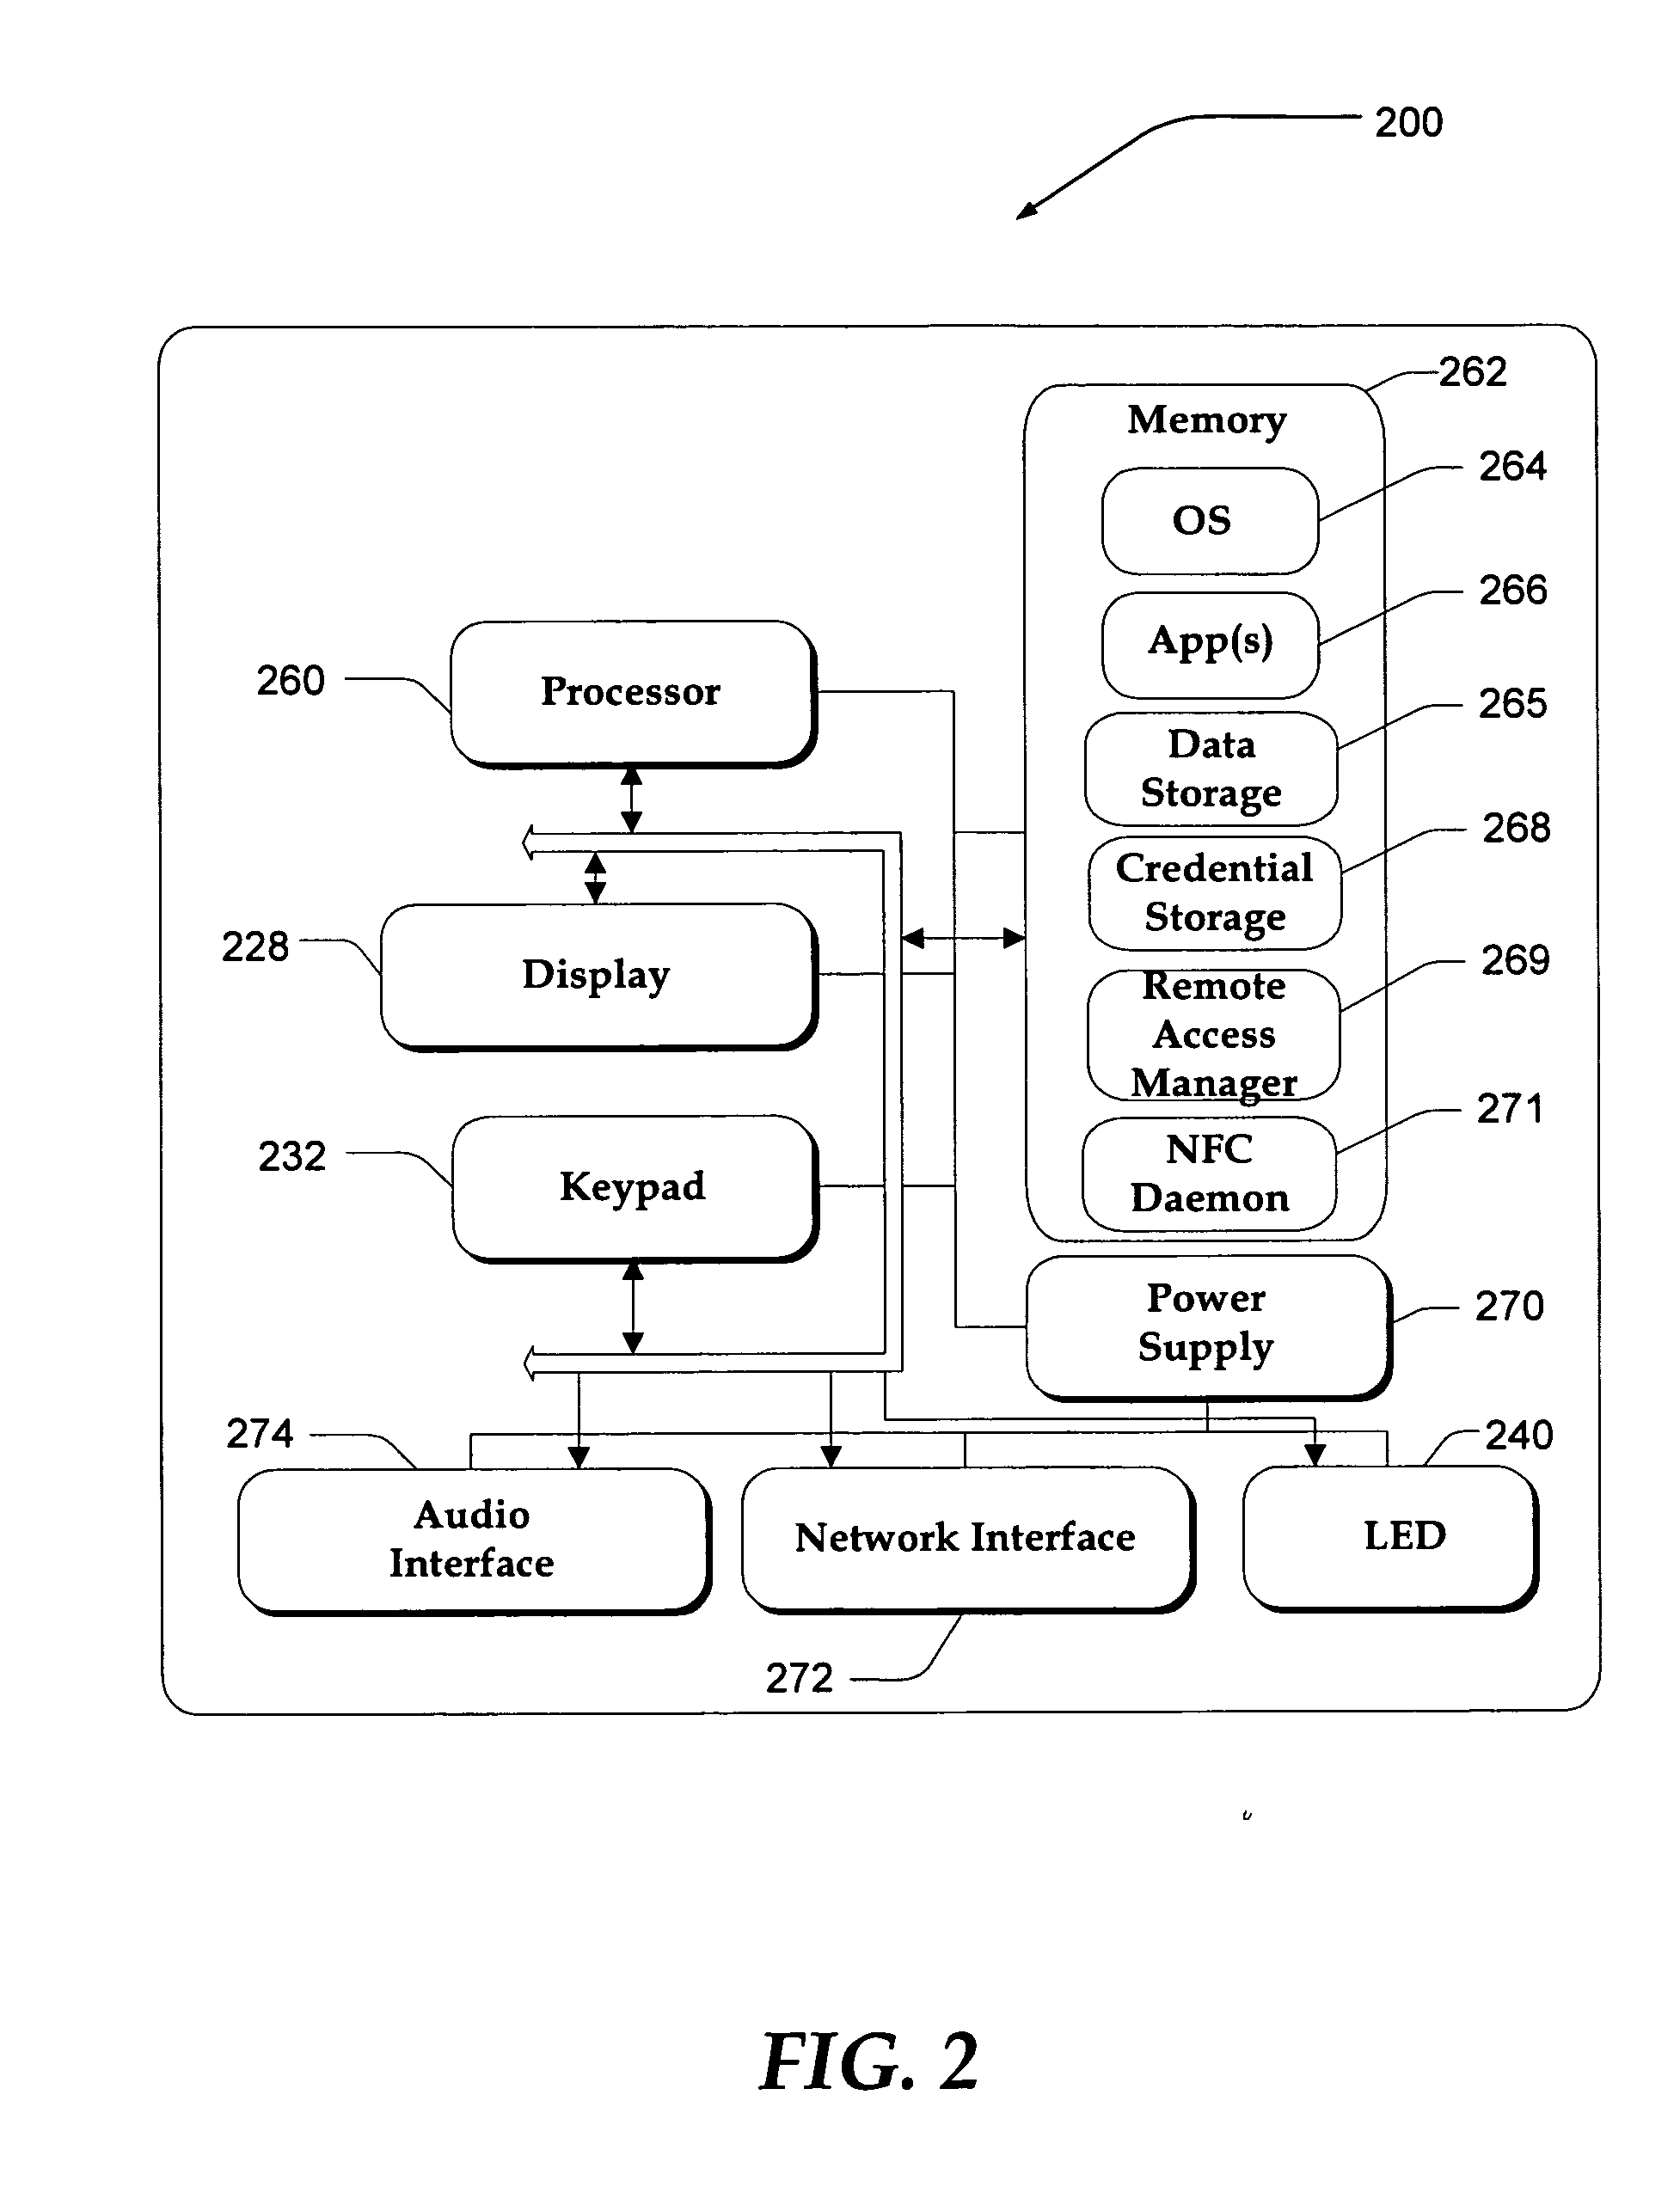 Managing an access account using personal area networks and credentials on a mobile device